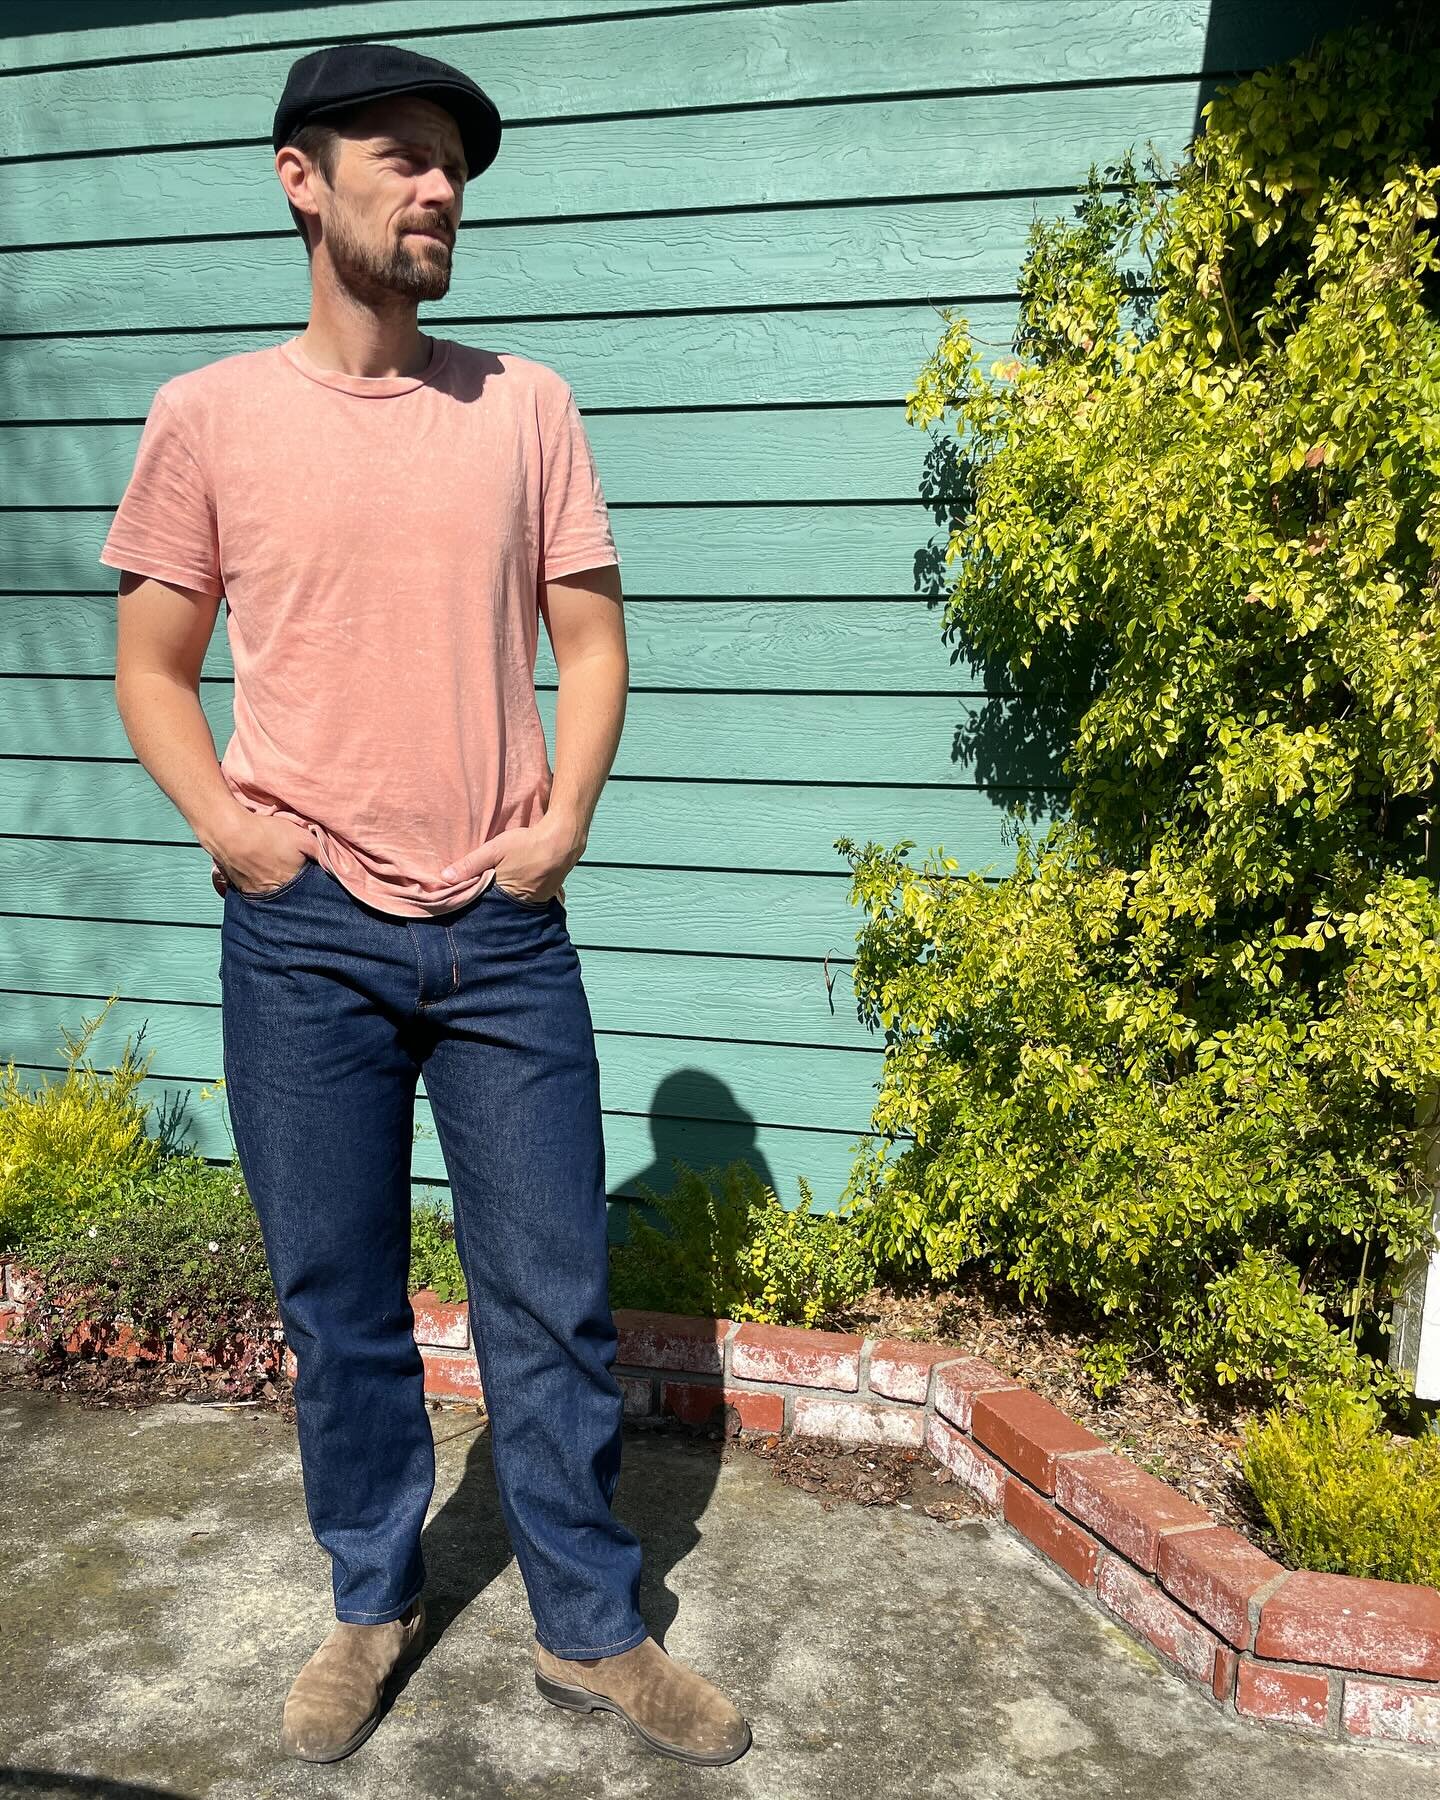 I&lsquo;ve been prepping for my Jeans Fitting and Sewing Workshop at @needlesstudio happening this weekend! 

I made Philipp a pair of jeans using the #FulfordJeans from @threadtheorydesigns . We had to do quite a lot of modifications to get these je